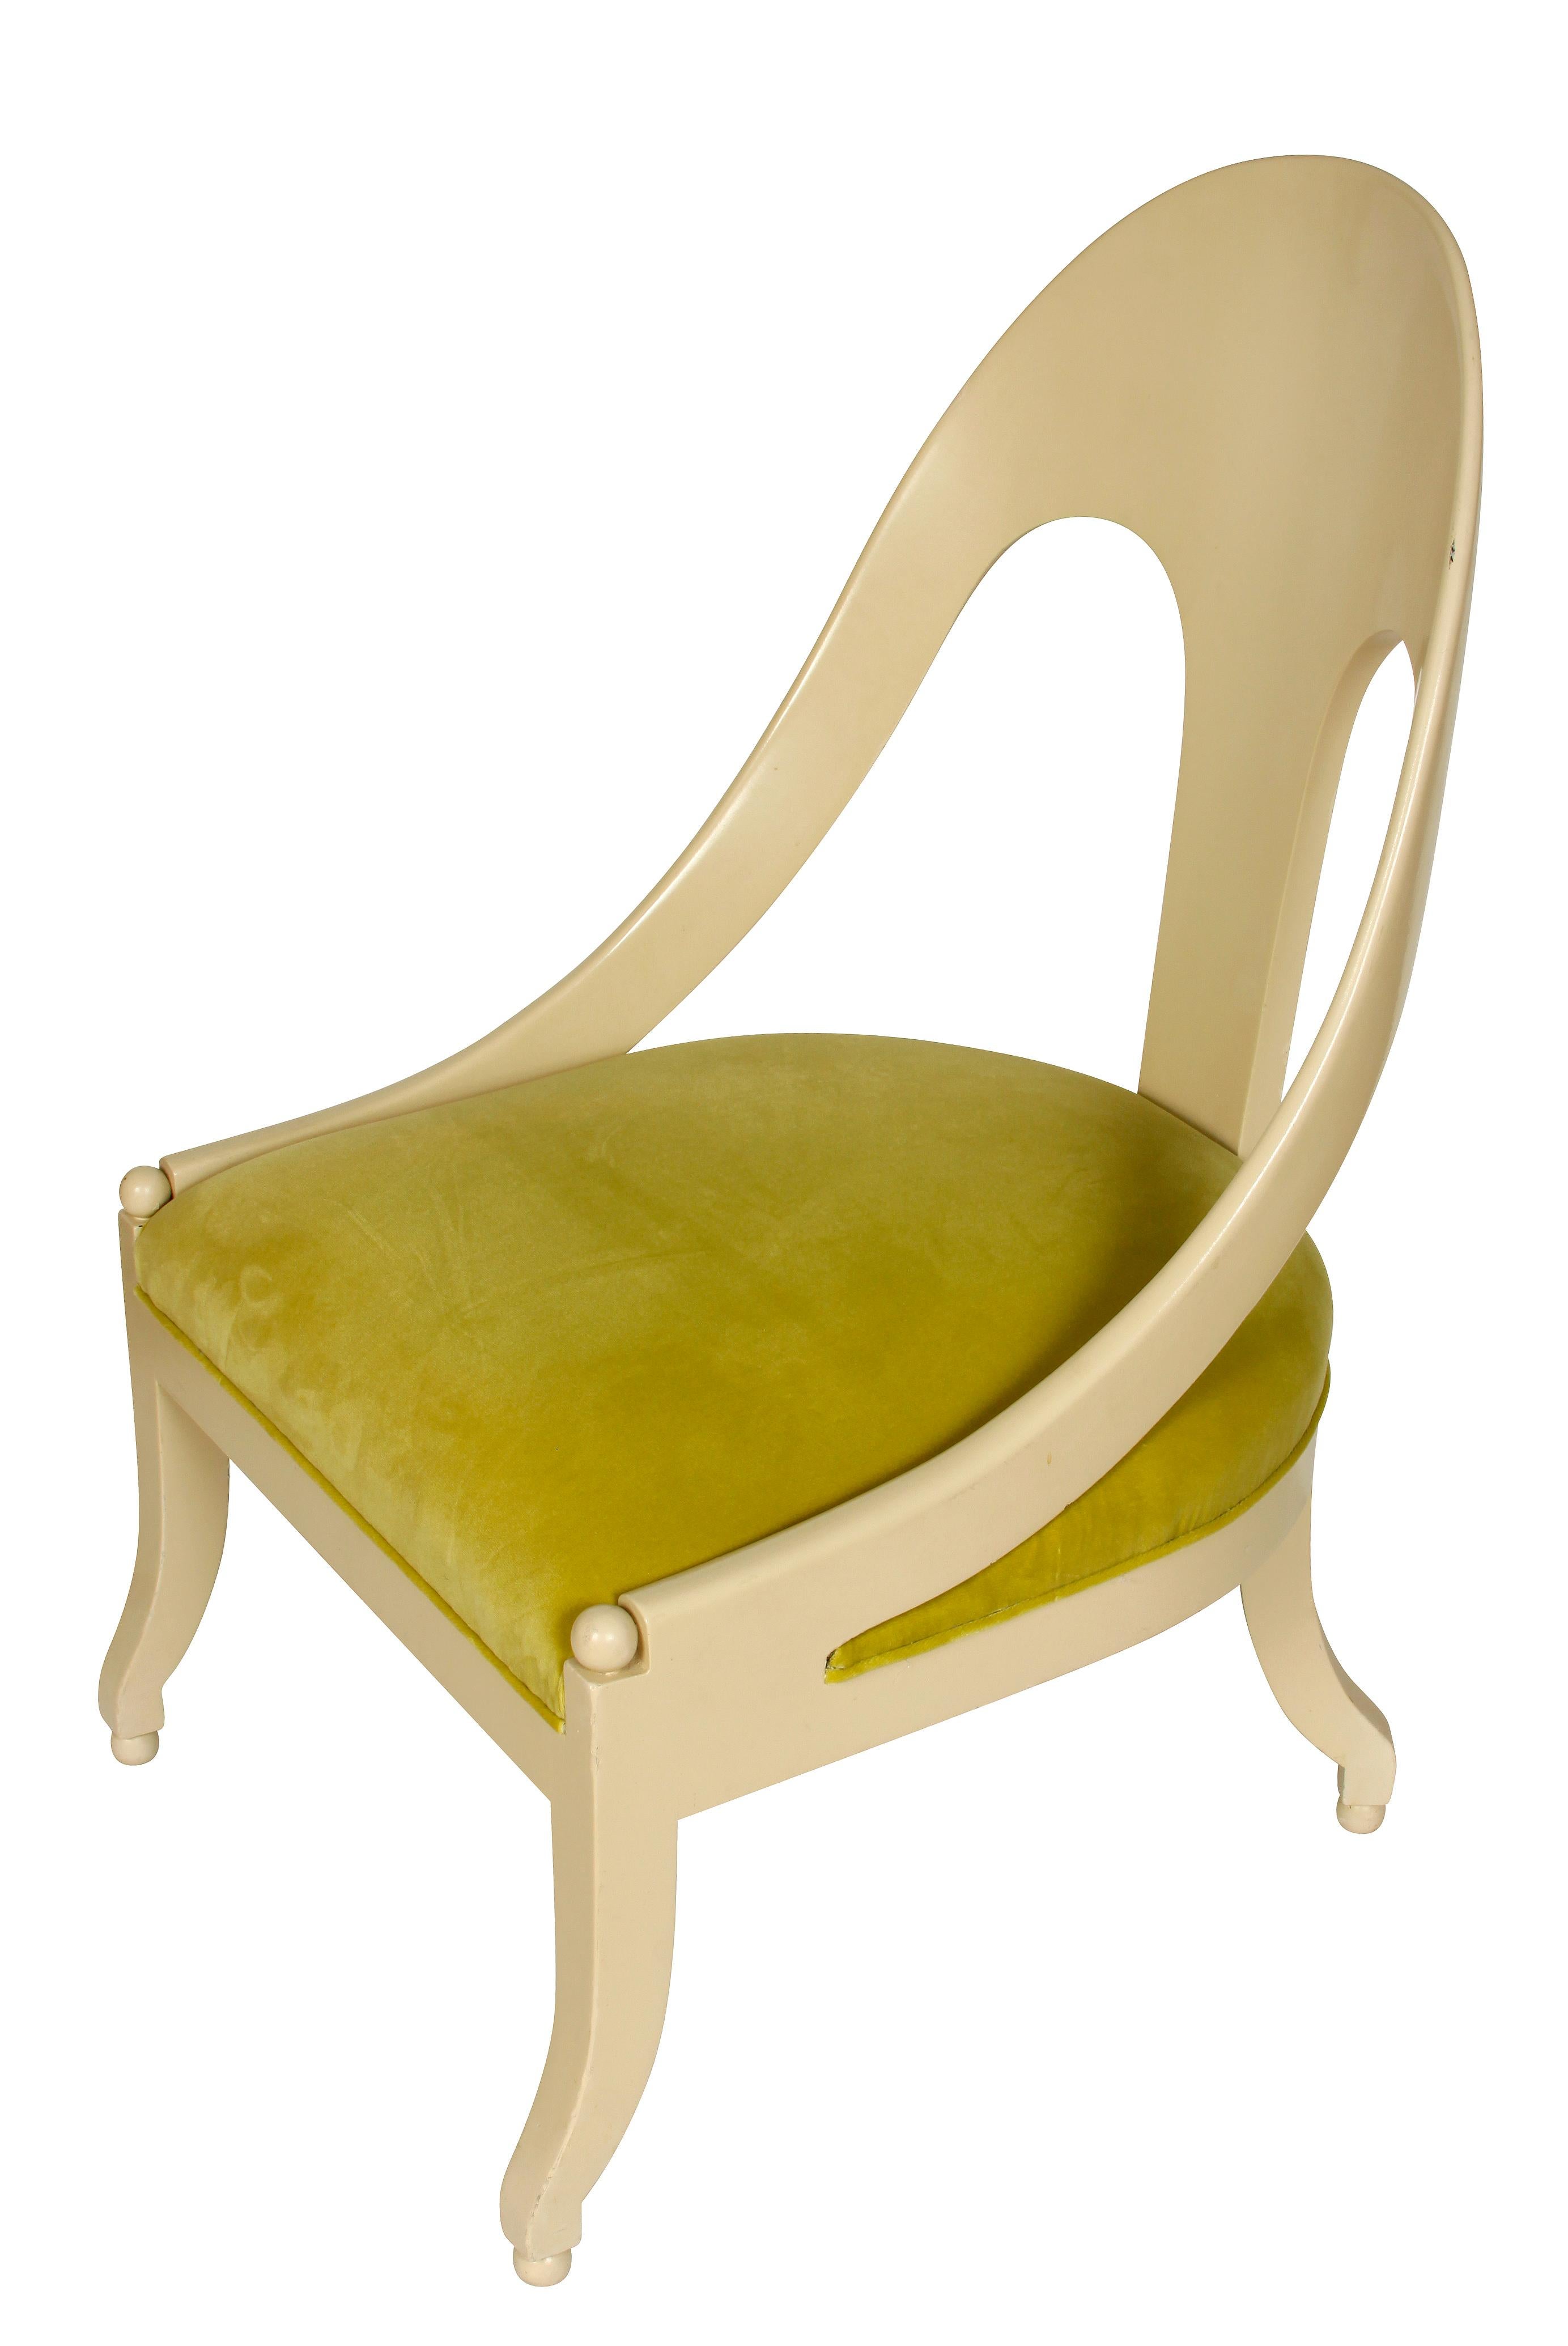 Michael Taylor style painted spoon chair, newly upholstered in chartreuse velvet.